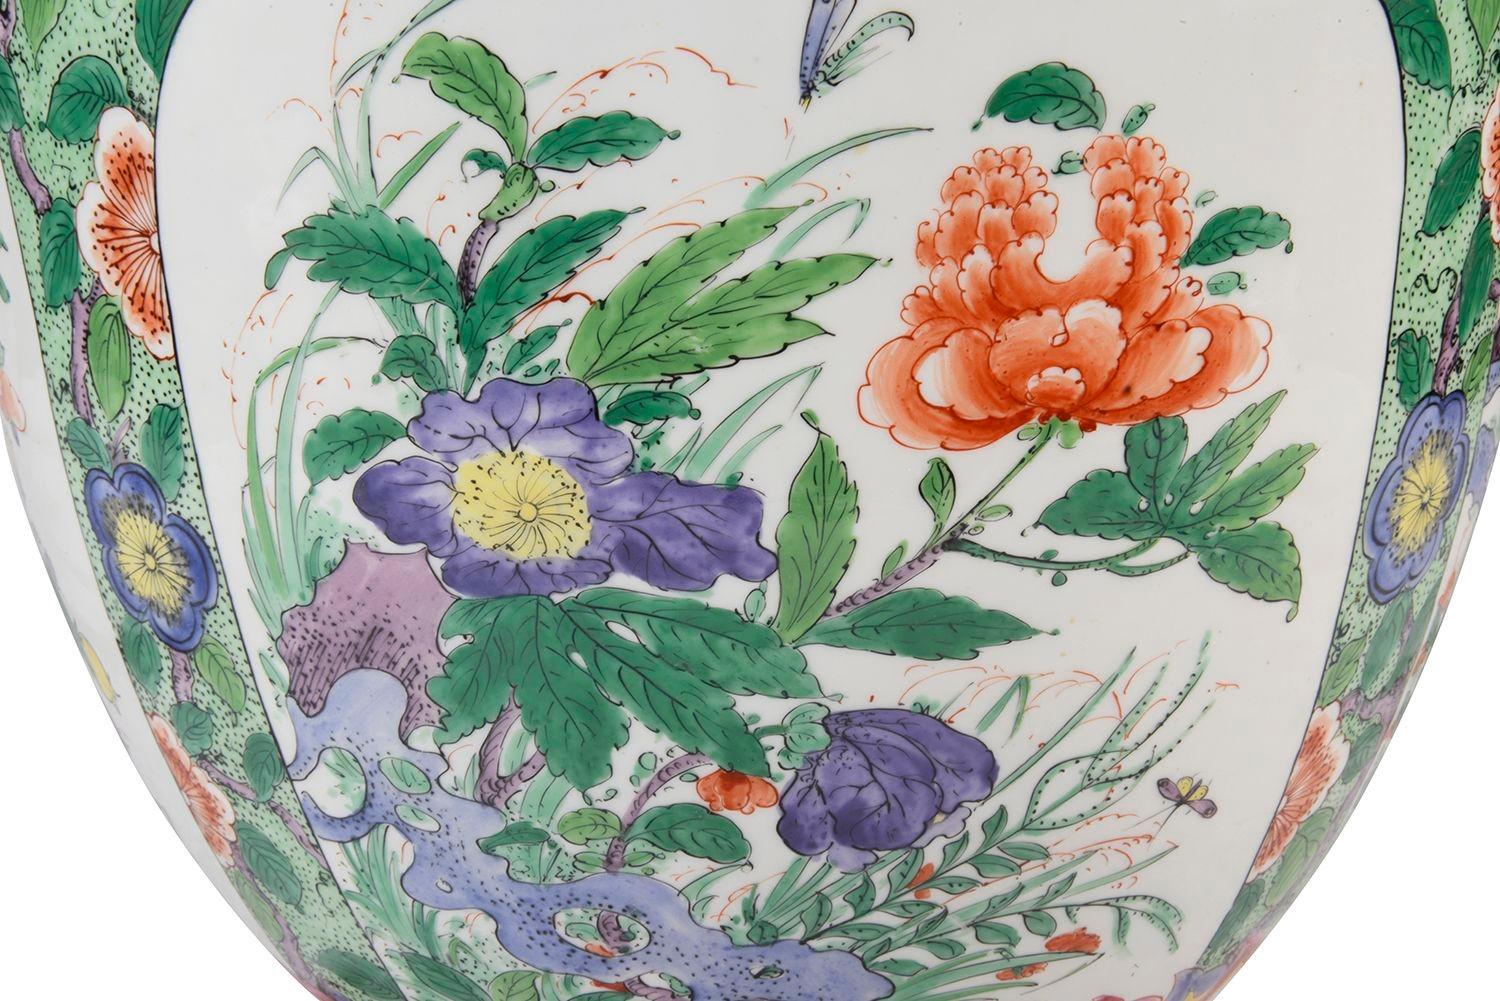 A very decorative late 19th Century Chinese Famille Verte style Samson porcelain jardinière. Having wonderful bold green ground with motif, floral and foliate decoration. Inset hand painted panels depicting exotic flowers and butterflies.

Batch 76